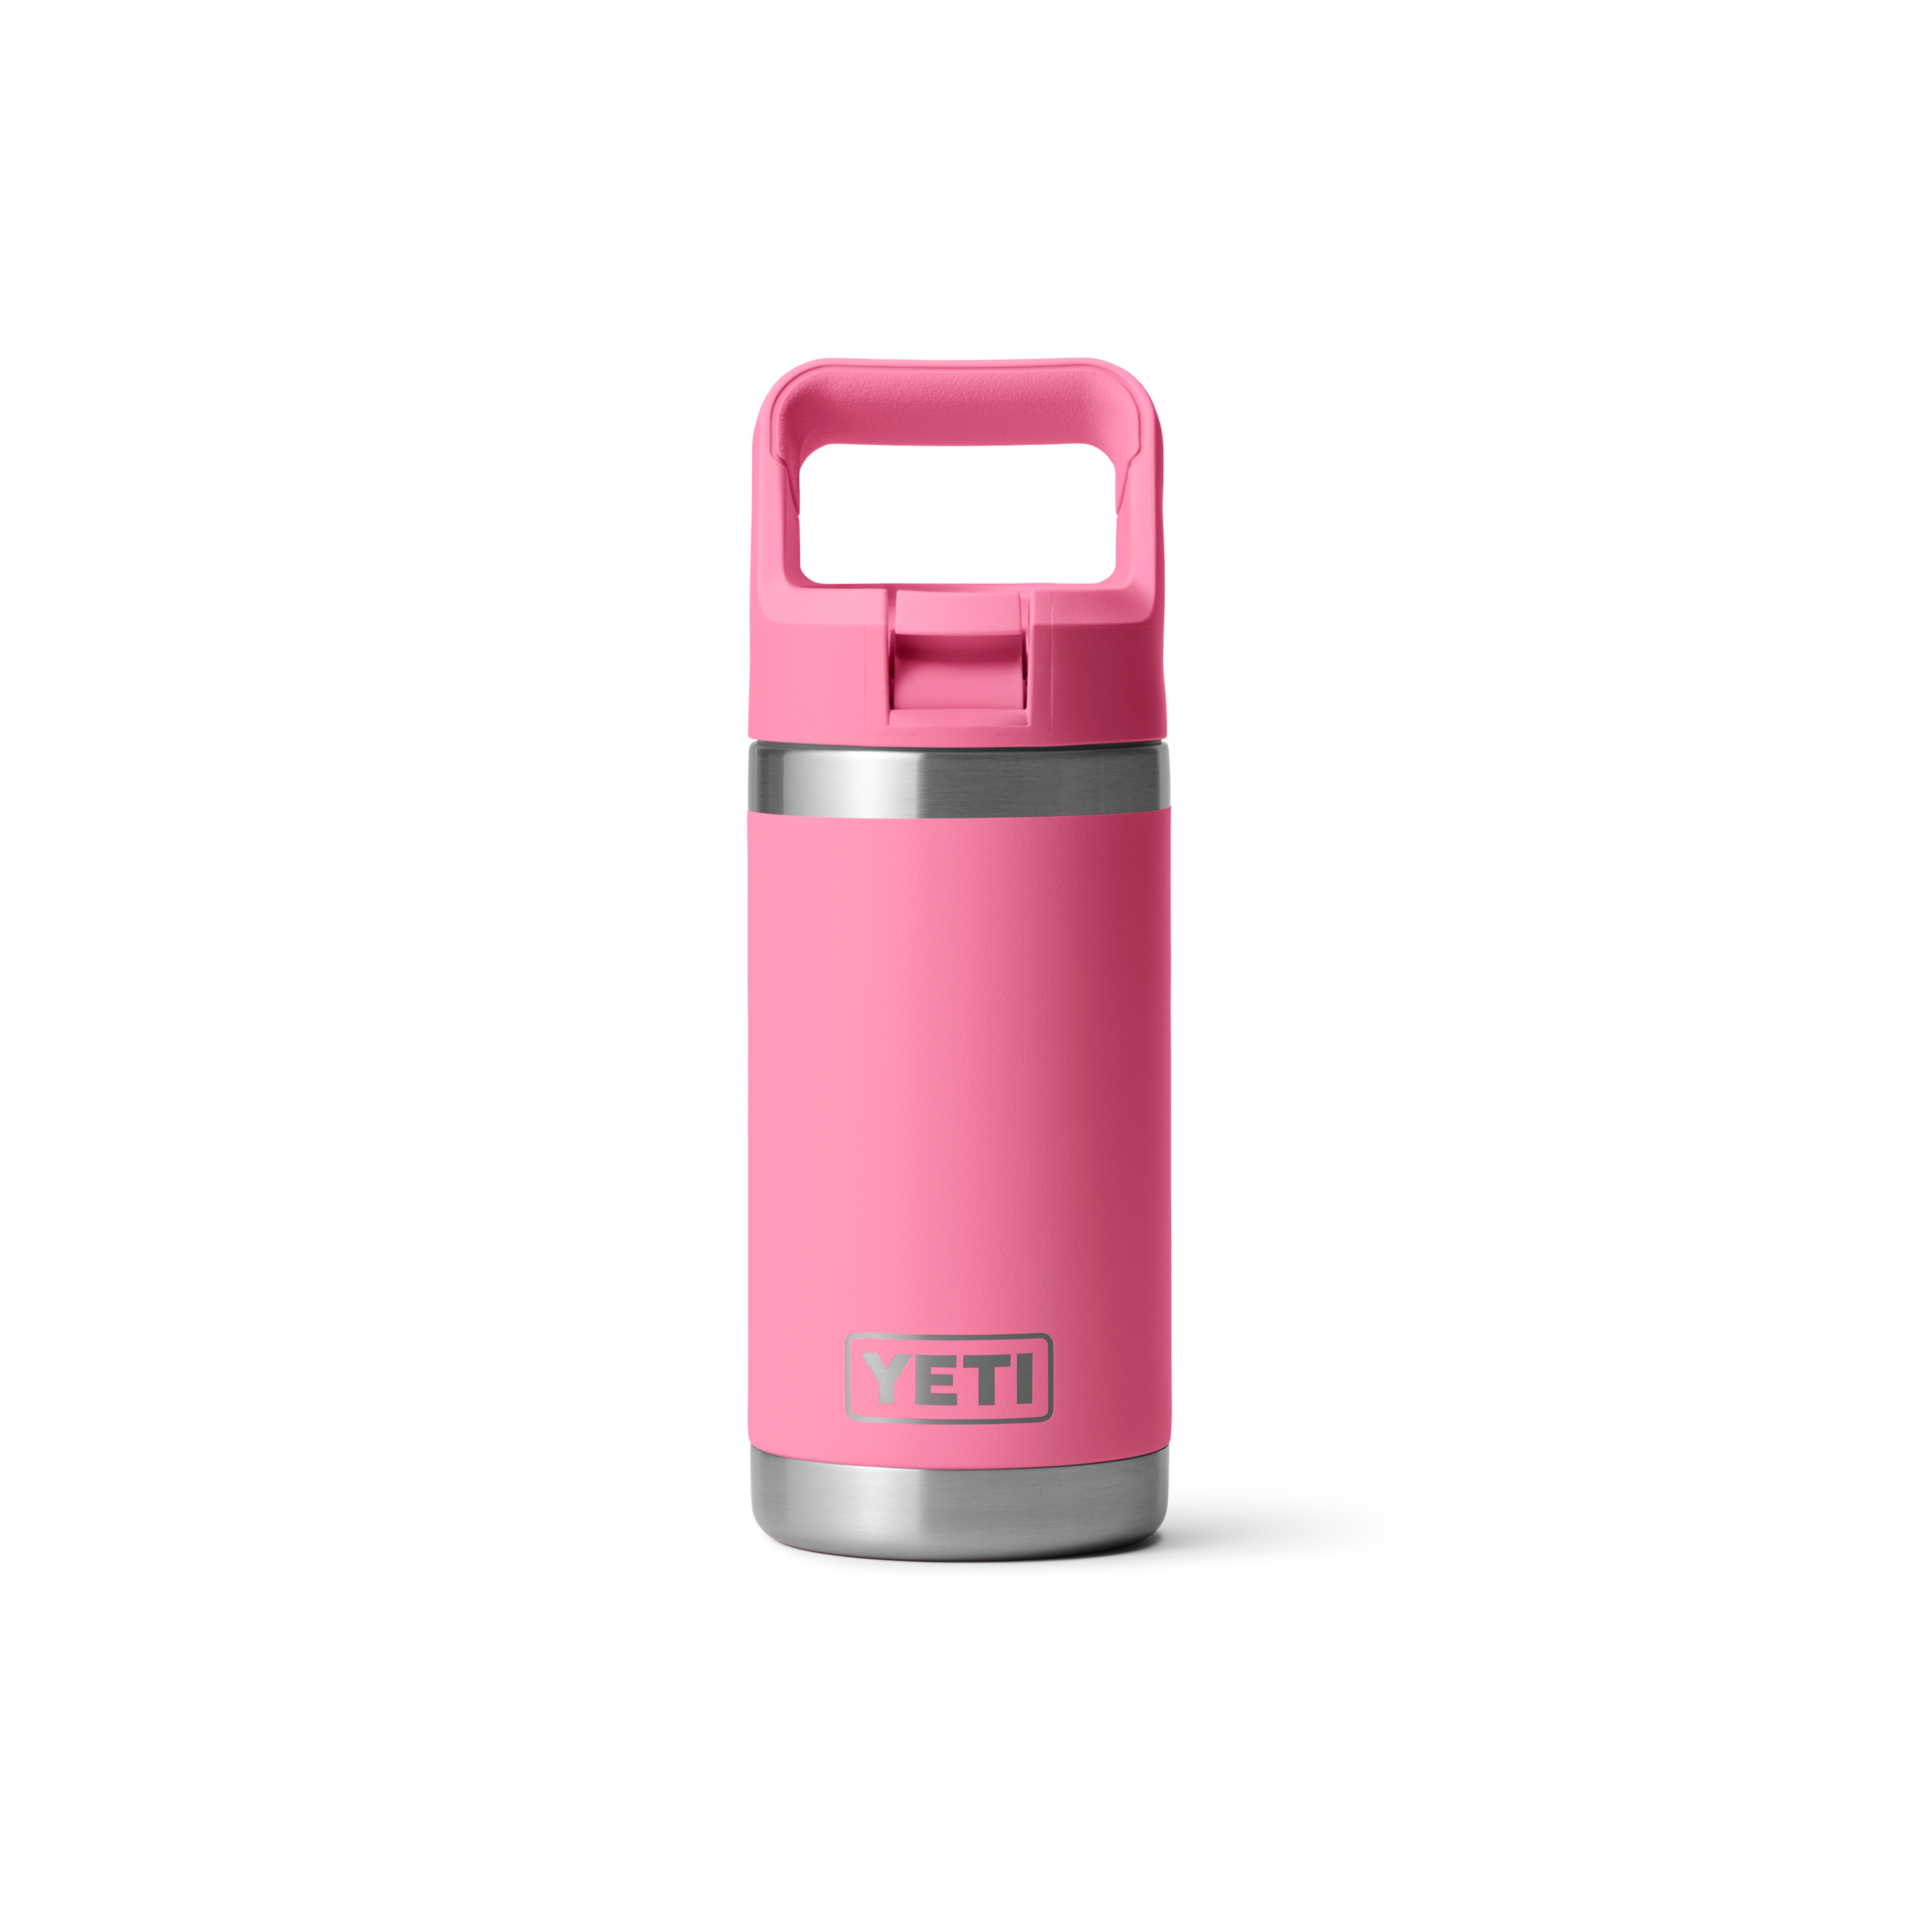 Dickson Barbeque Centre - Avenue Rd - 🖲️ NEW ARRIVAL! Smaller size! Great  to have the new YETI 10oz Tumbler in stock for the holidays 😊👍. . #YETI  #YetiTumbler #YetiRambler #strong #durable #